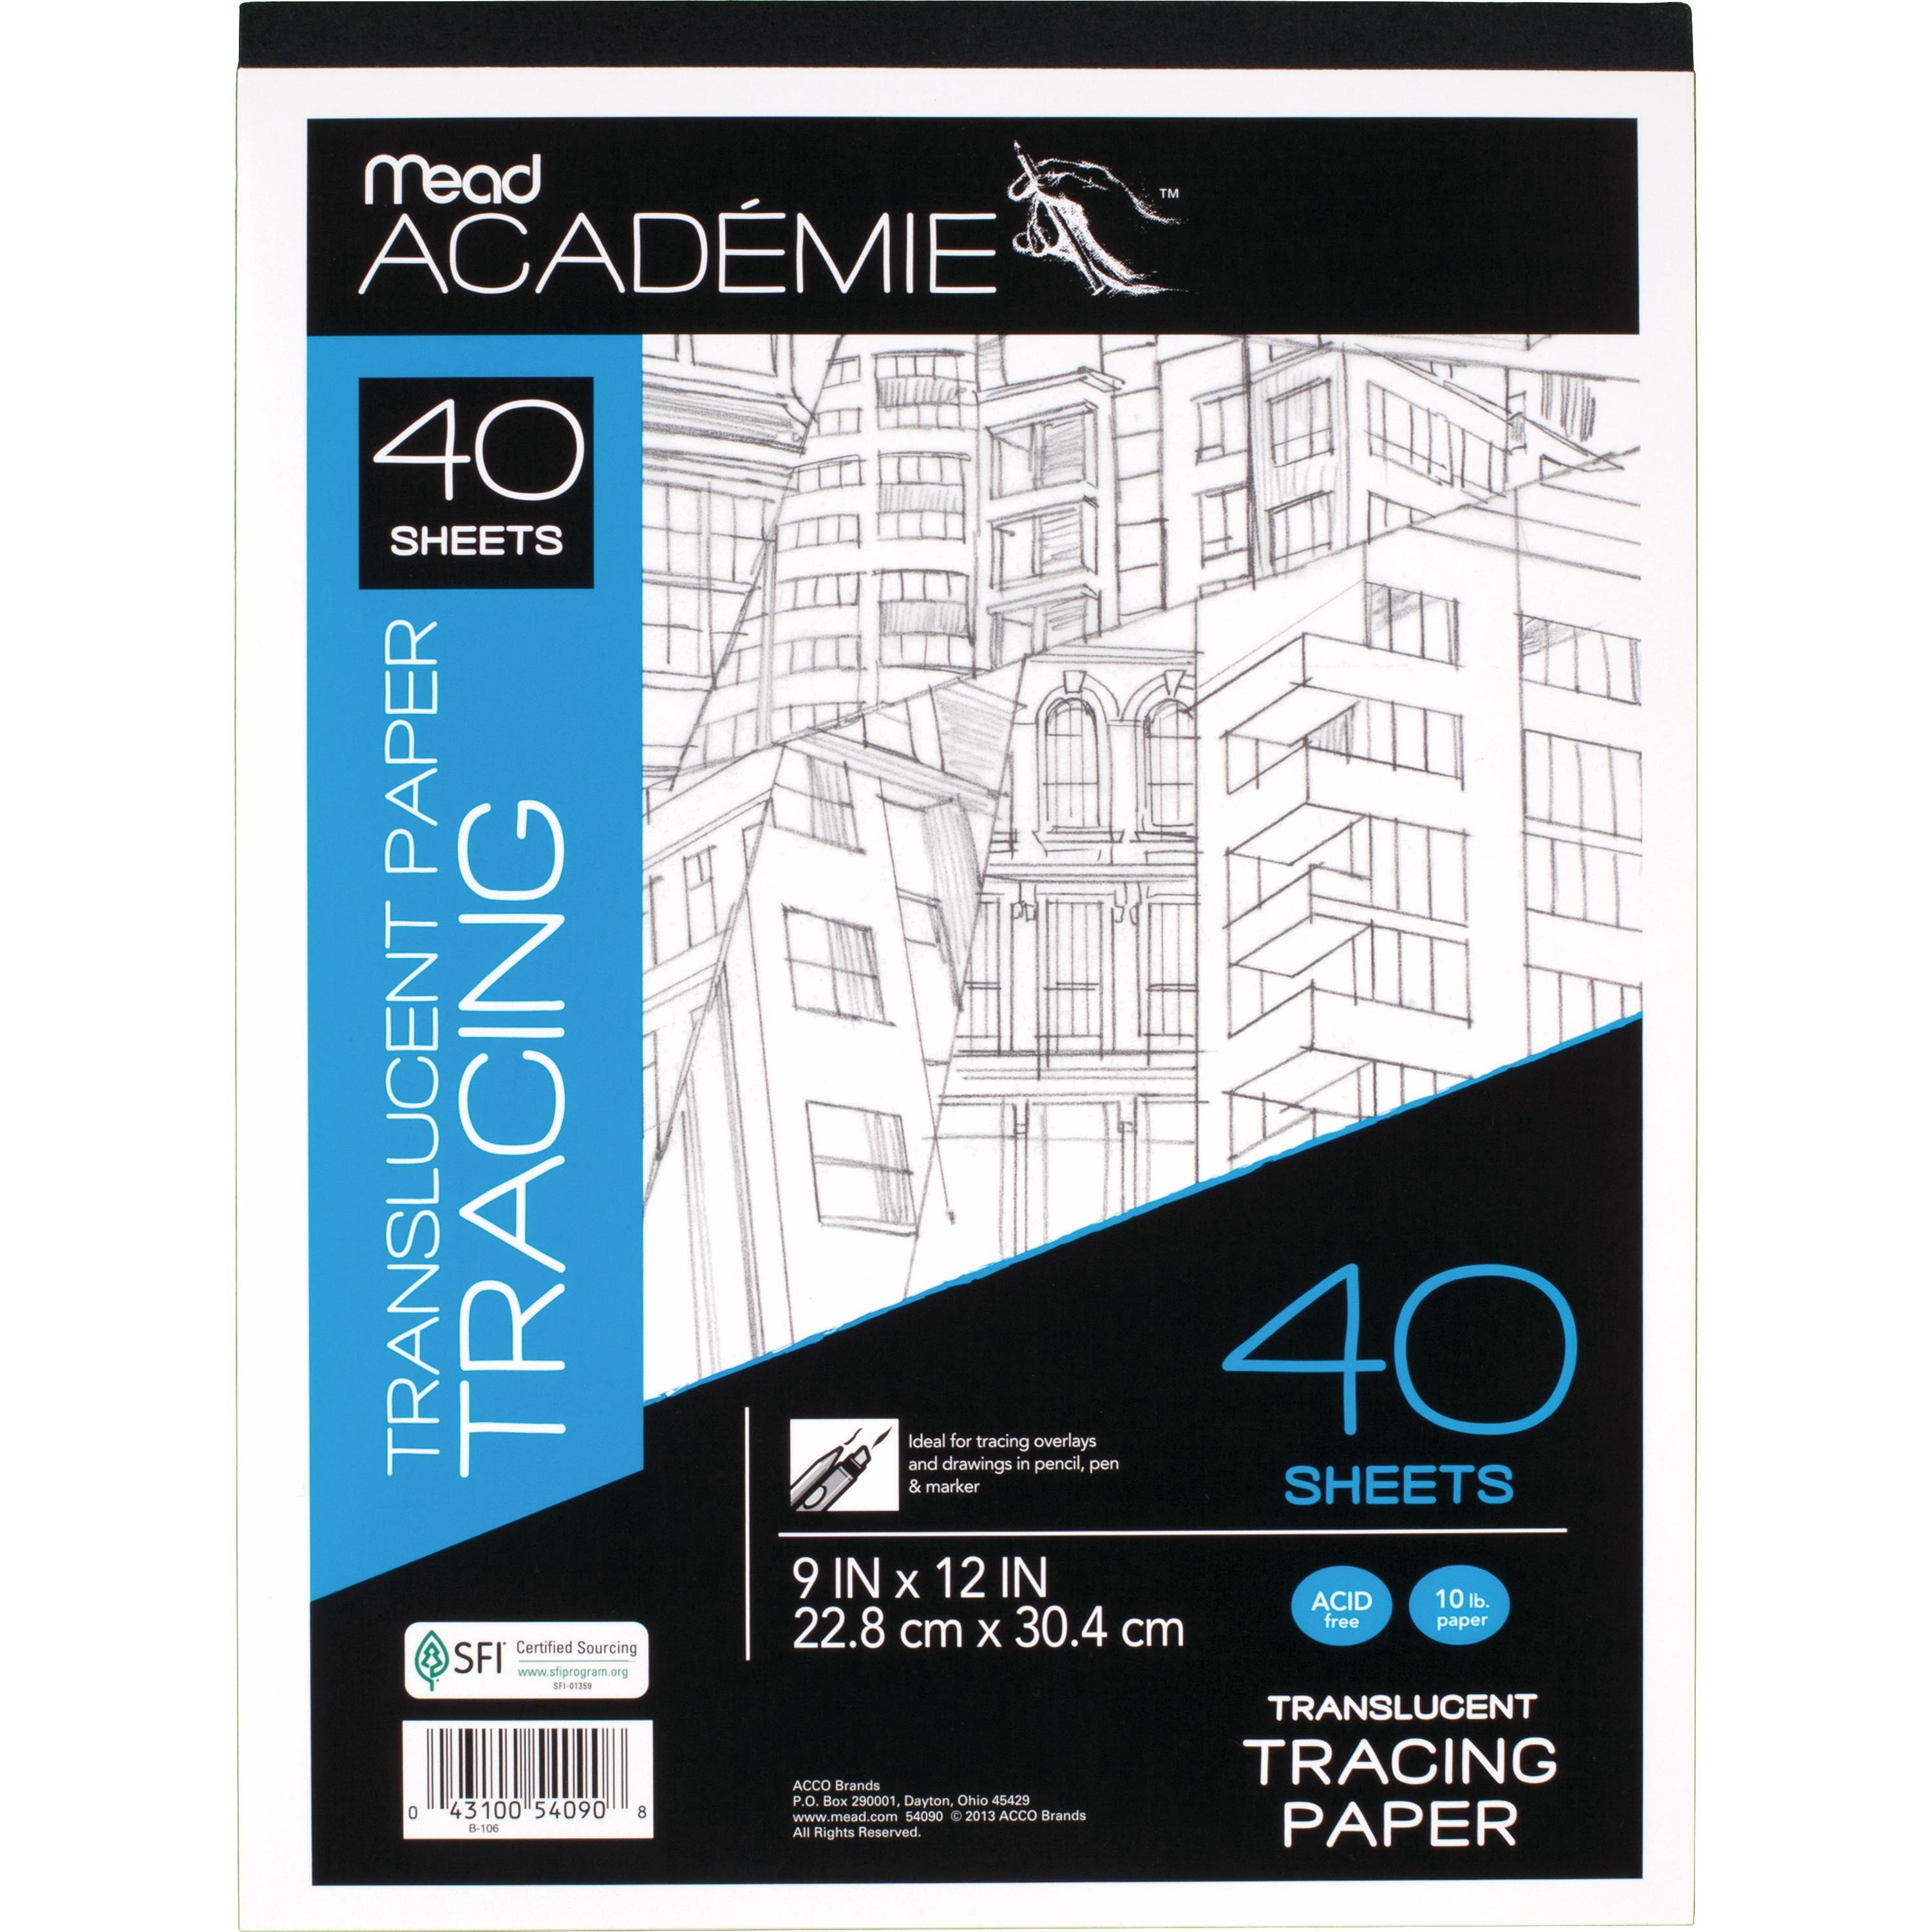 Mead Academie Translucent Tracing Paper - 9"x12", 40 Sheets